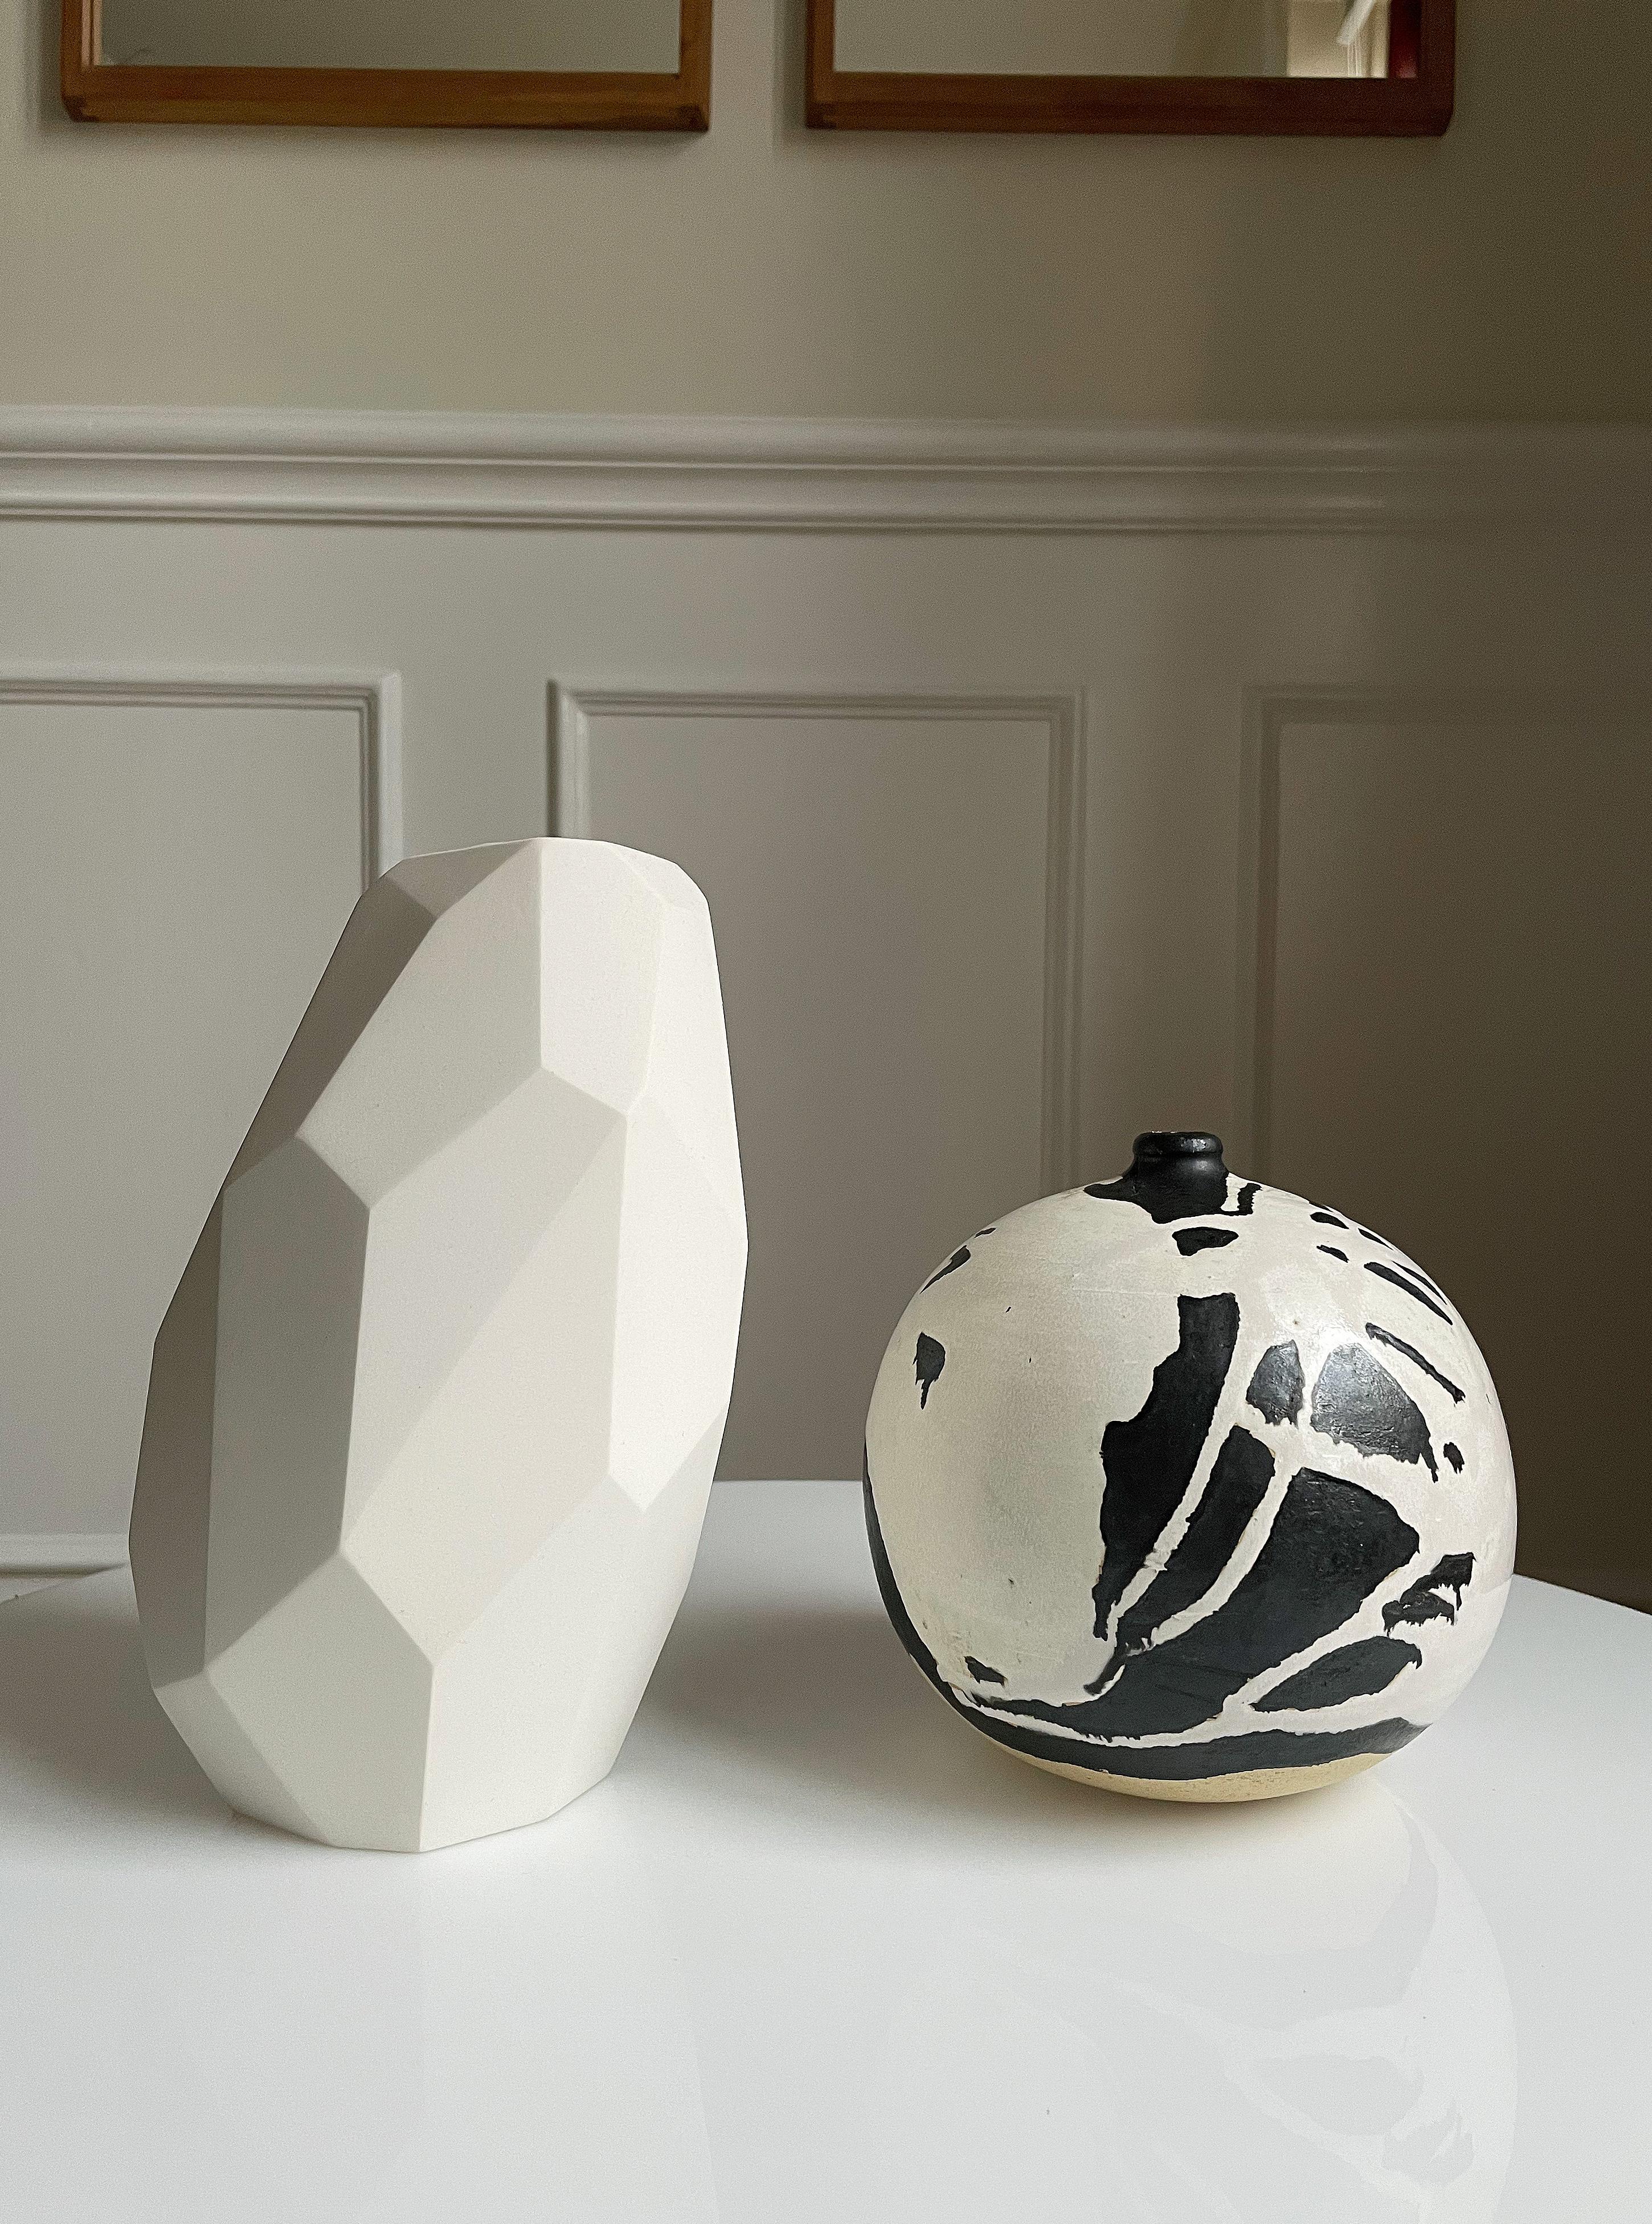 Limited edition contemporary white ceramic sculptural vase by Danish ceramic artist Anne Jørgensen for AJ Ceramics. The sculptural slanted design consists of multiple sharp angles and different size surfaces from top to base, all sanded by hand.